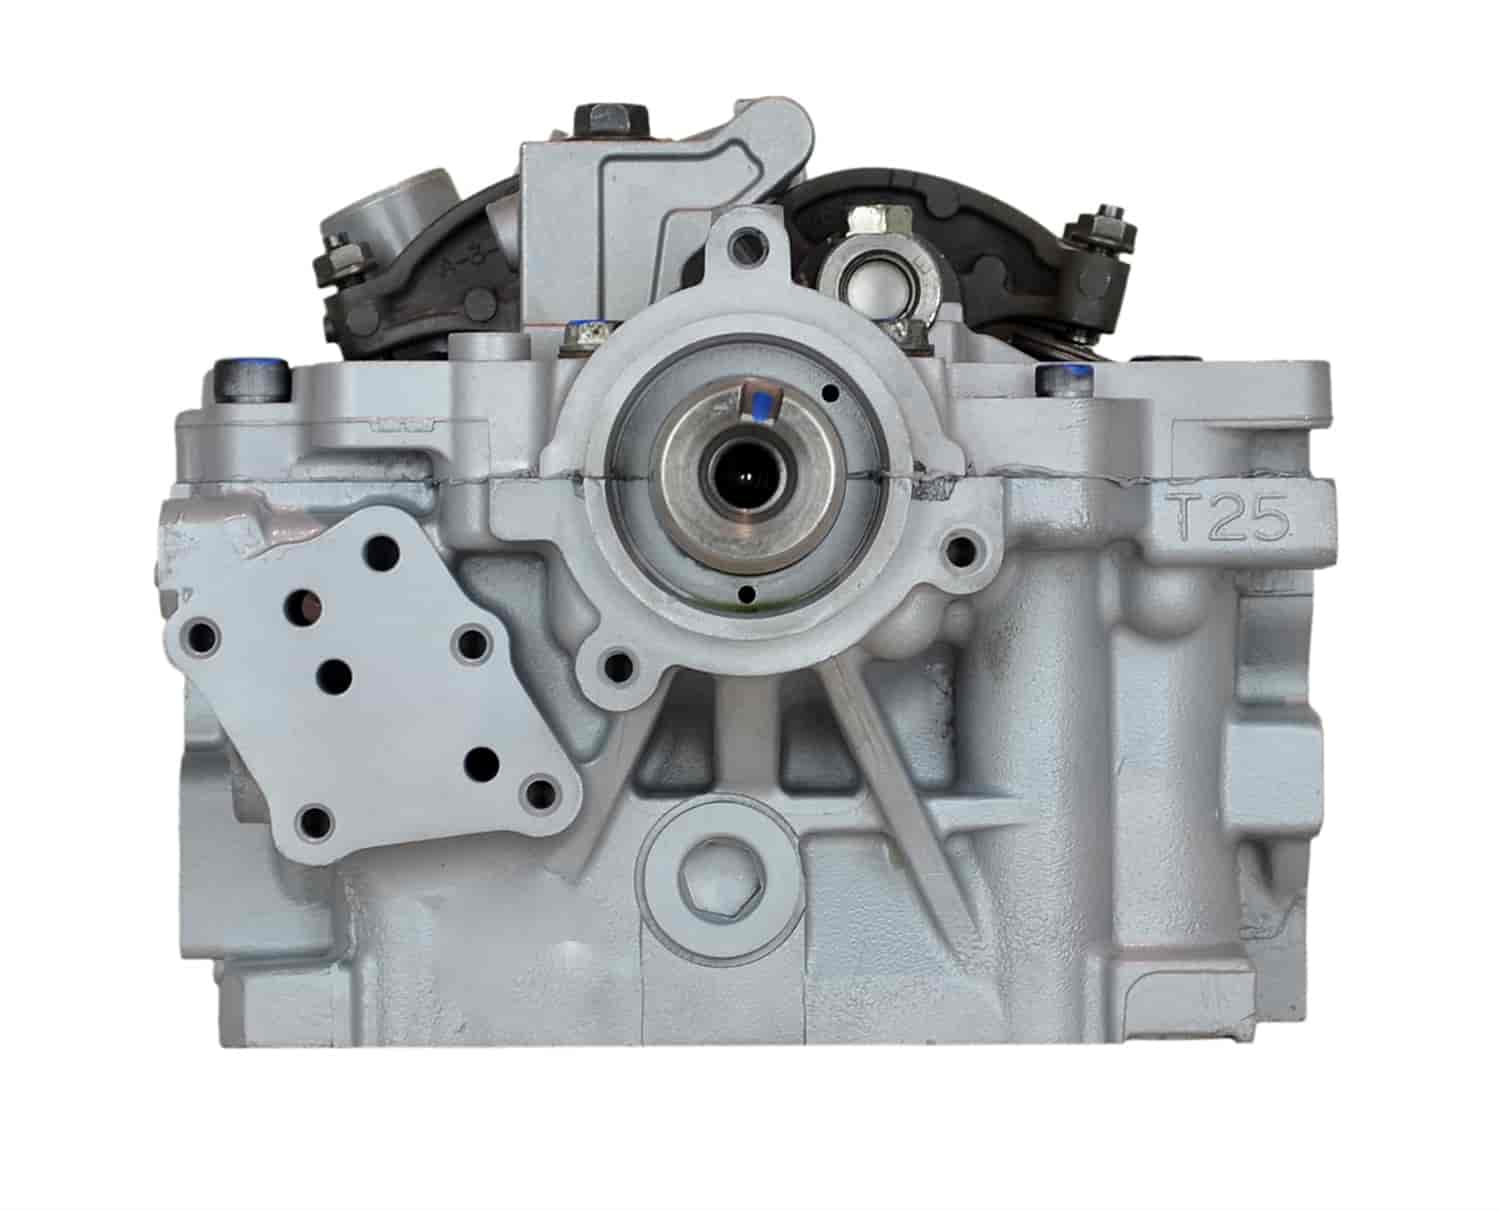 Remanufactured Cylinder Head for 2005-2011 Subaru/Saab with 2.5L